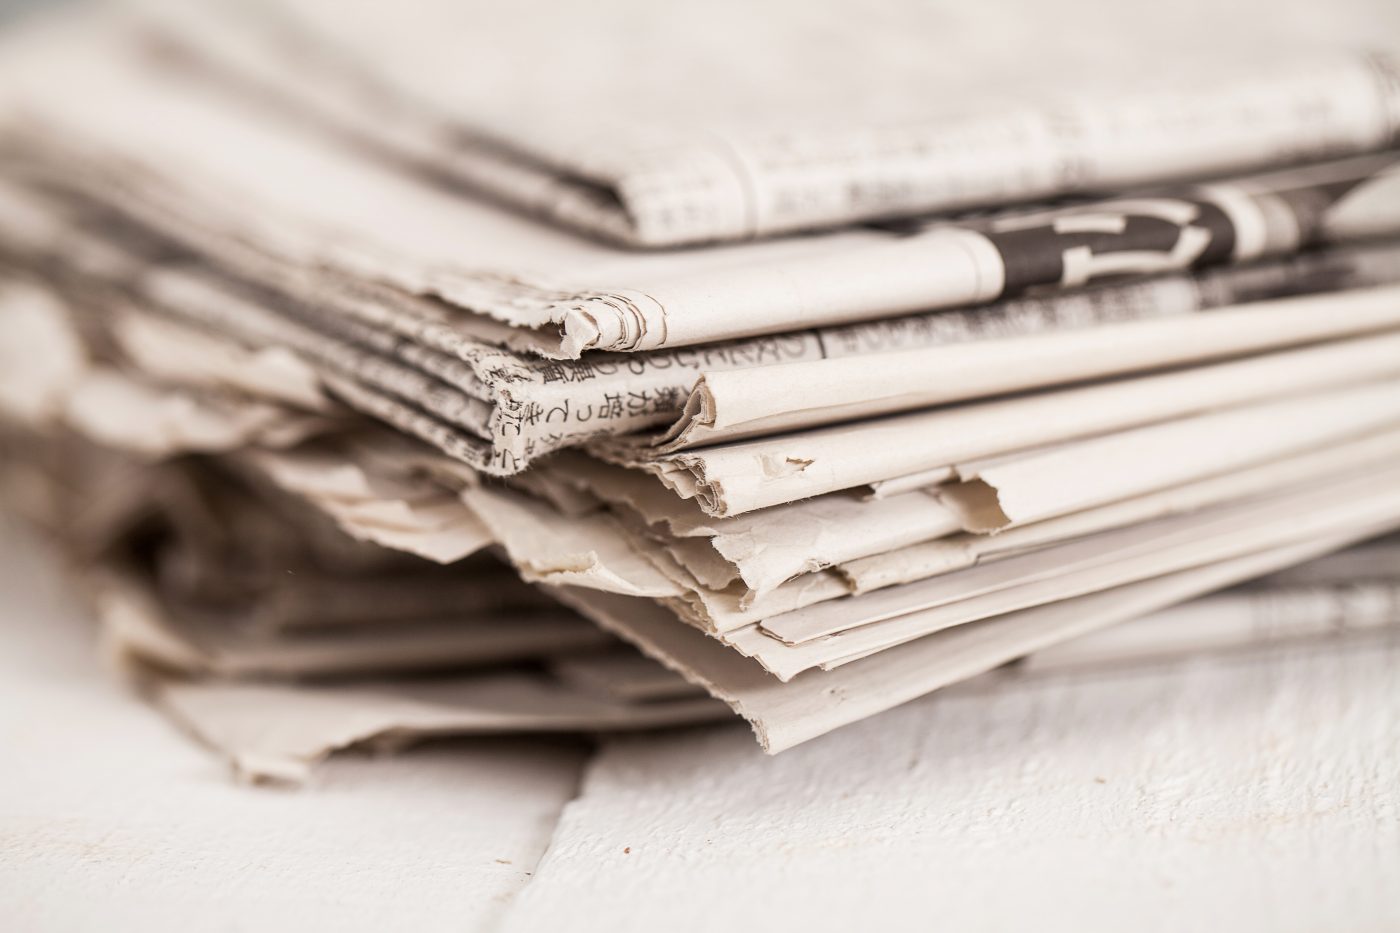 LOCAL IRELAND MAKES THE CASE FOR LOCAL NEWS PUBLISHERS